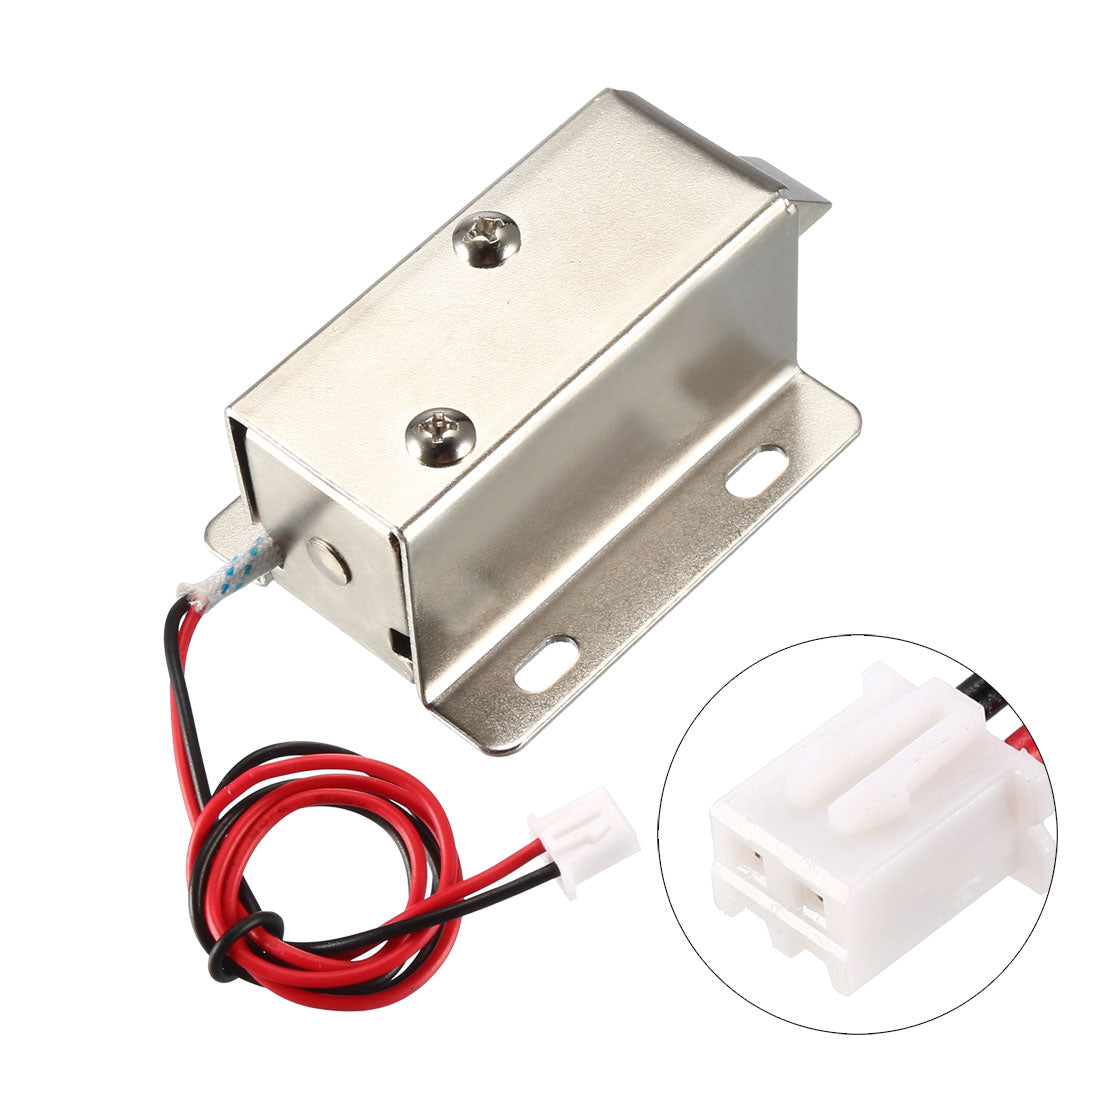 uxcell Uxcell DC 24V 2.3A 11.4mm Electromagnetic Solenoid Lock Assembly for Electirc Lock Cabinet Door Lock